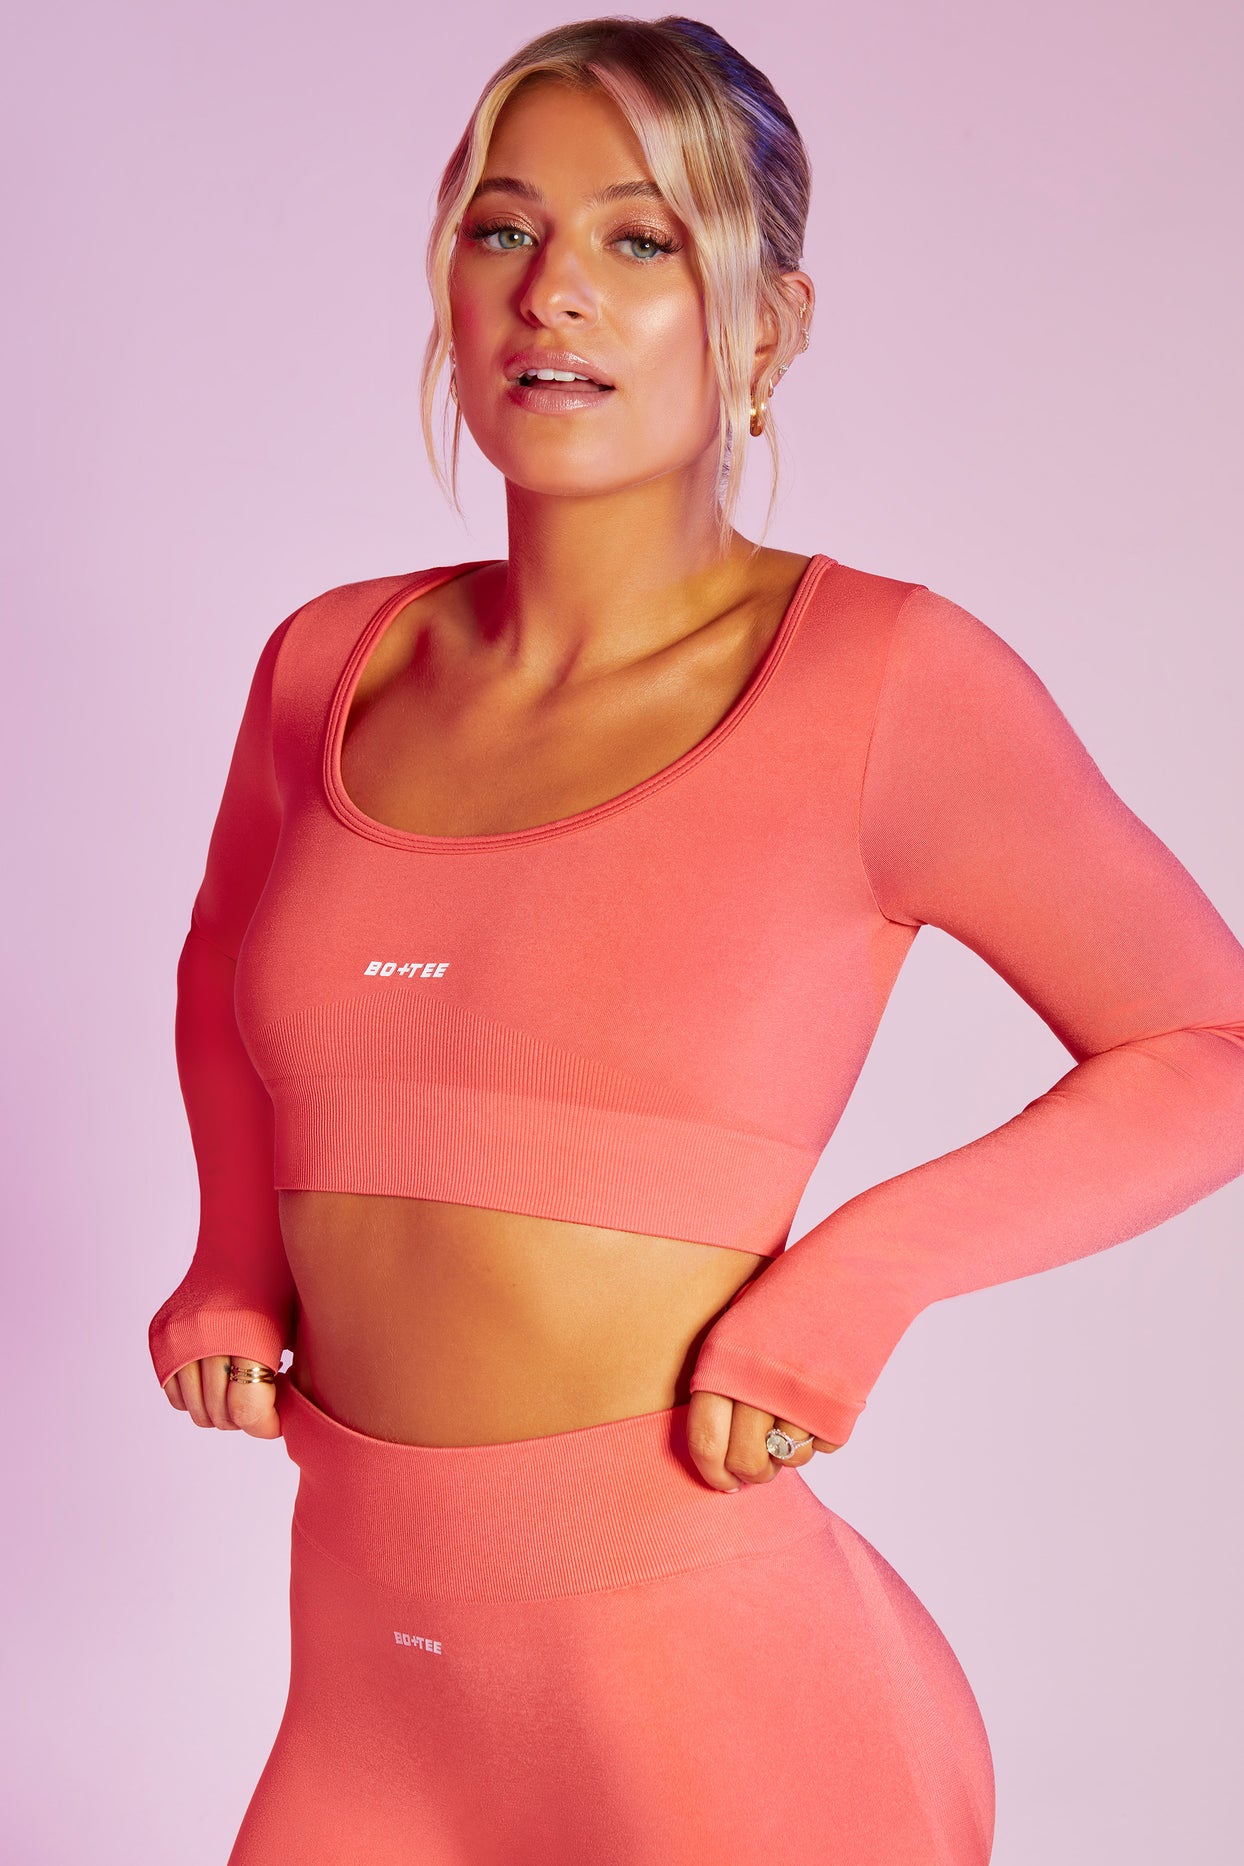 Reignited Seamless Long Sleeve Scoop Neck Crop Top in Coral